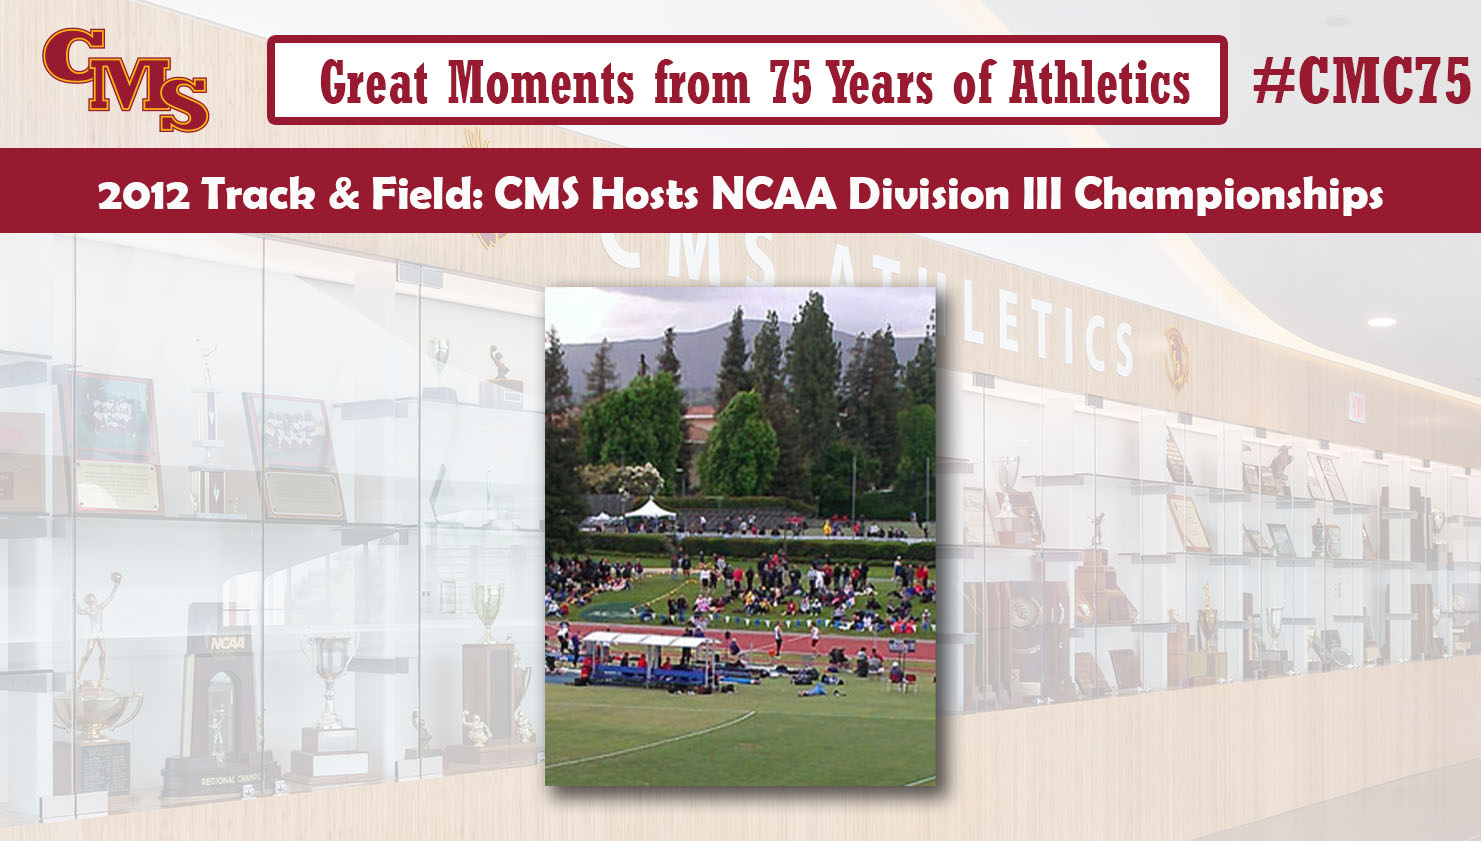 A picture of the NCAA event at CMS. Words over the photo read: Great Moments from 75 Years of Athletics, 2012 Track & Field: CMS Hosts NCAA Division III Championships